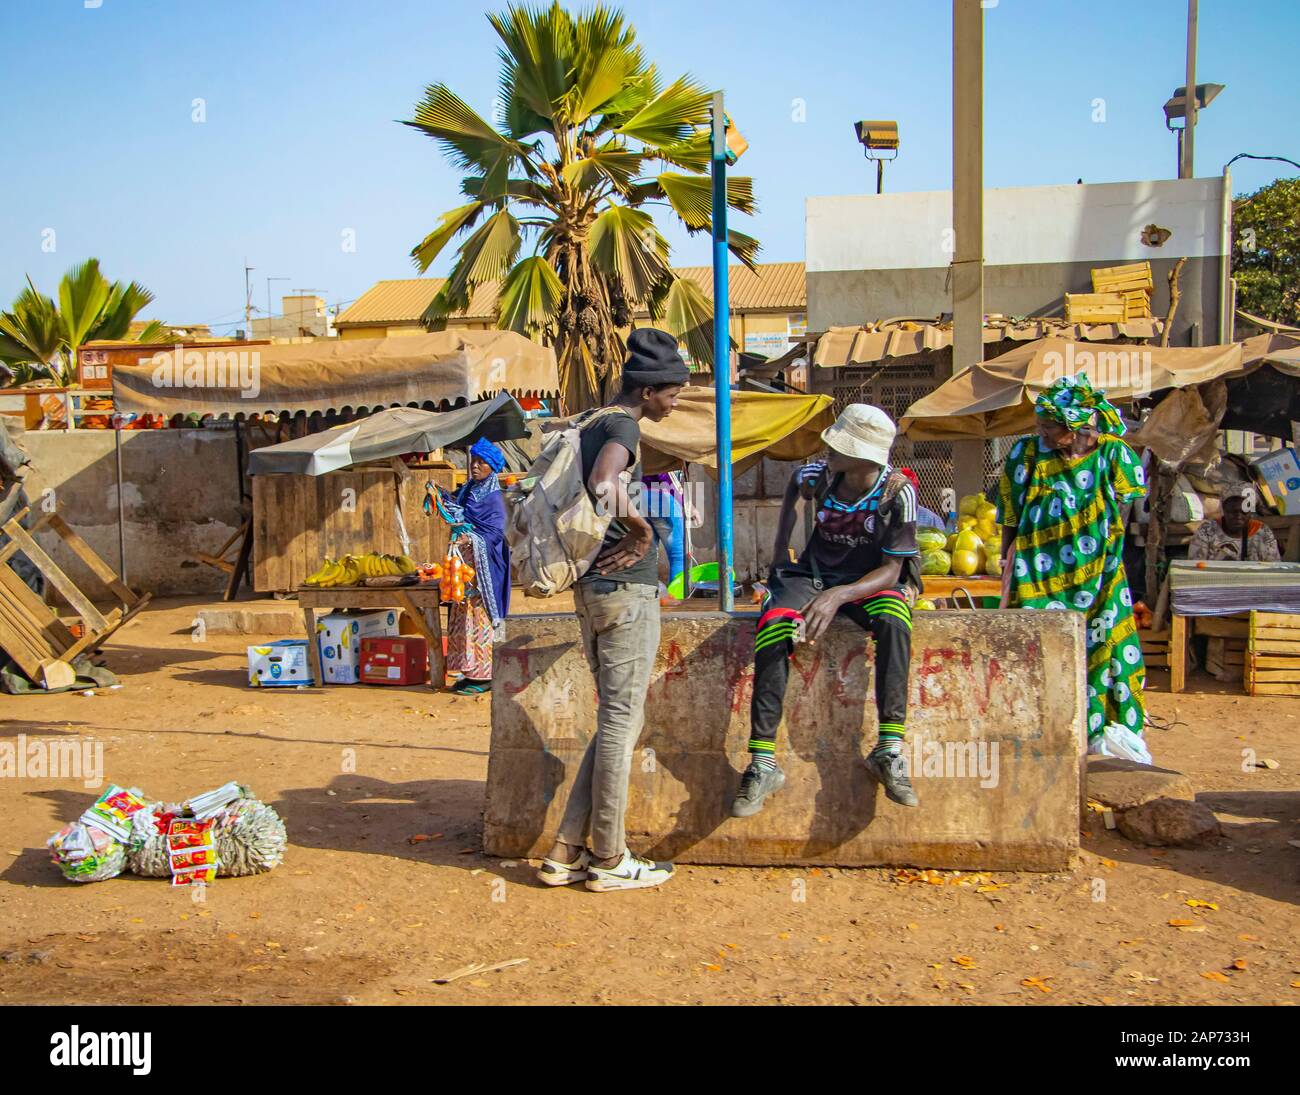 MBour, Senegal, AFRICA - April 22, 2019: Street fruit market where locals sell tropical fruits like melons, mangoes, oranges, lemons and more. A group Stock Photo